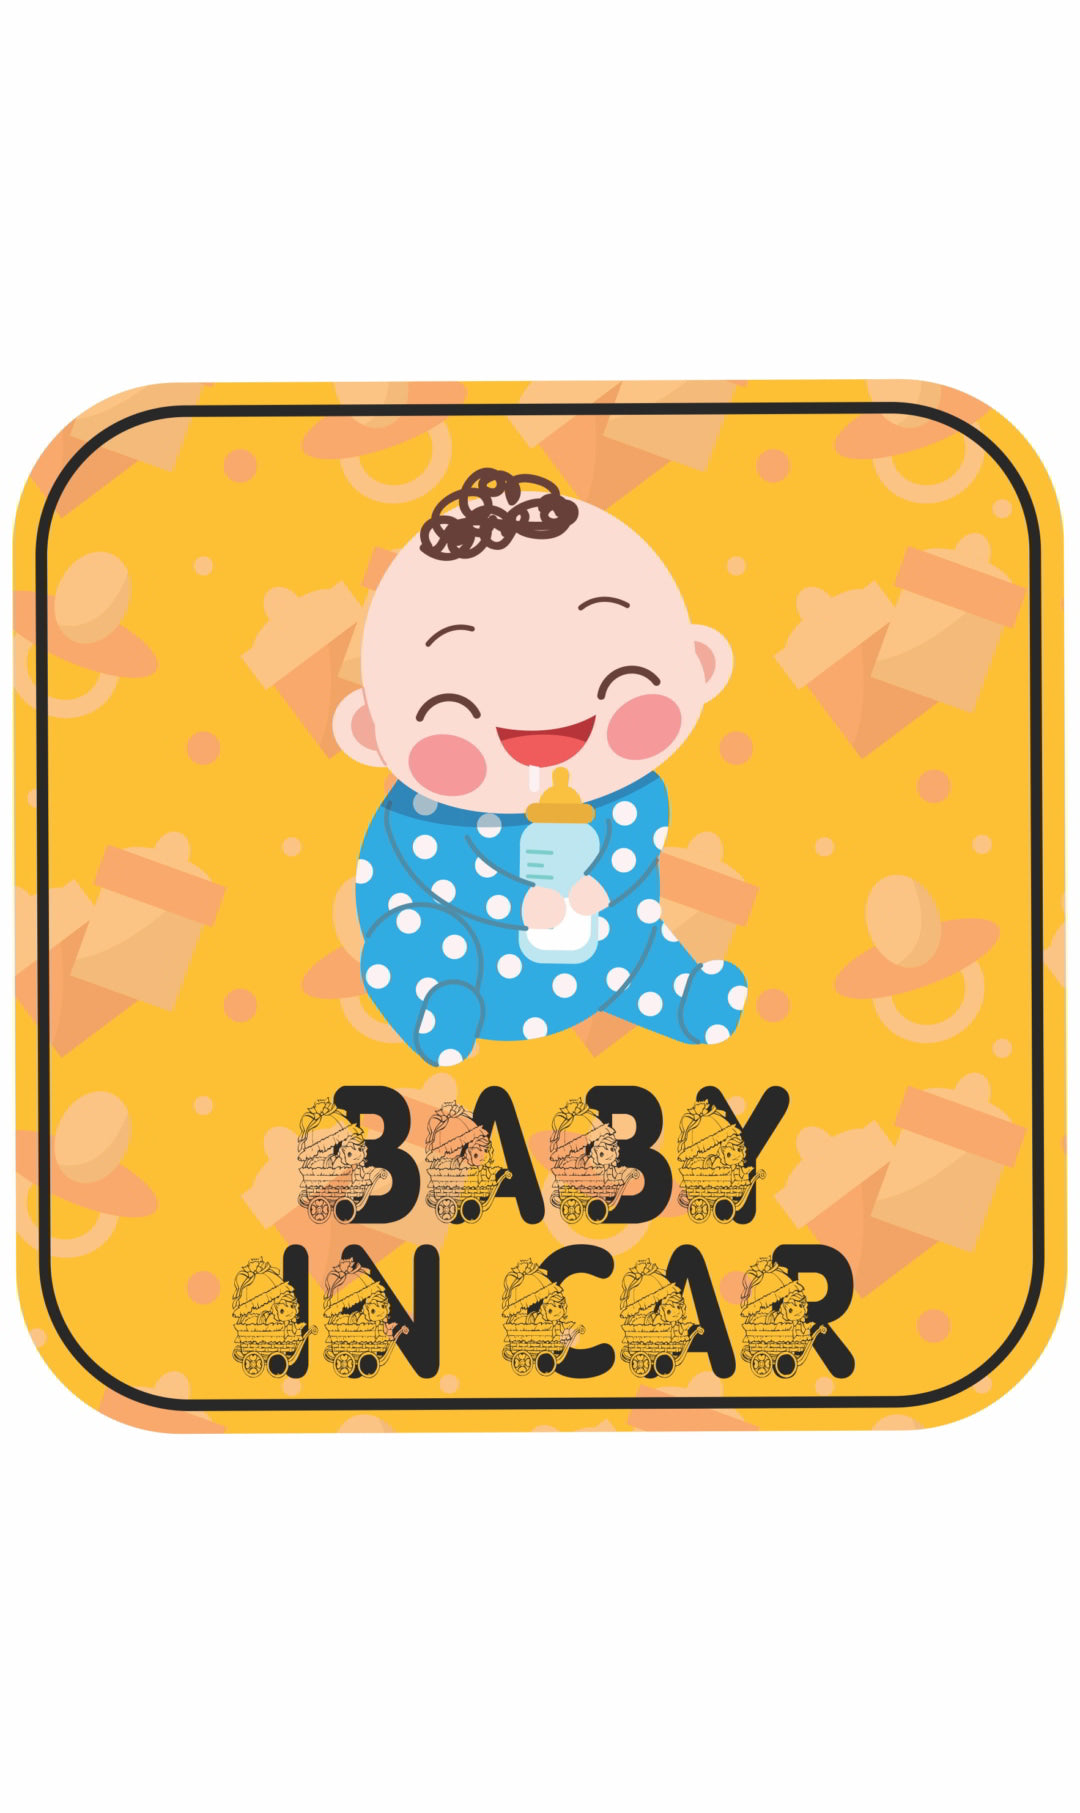 Baby in Car Decal Sticker(2pc)_c3